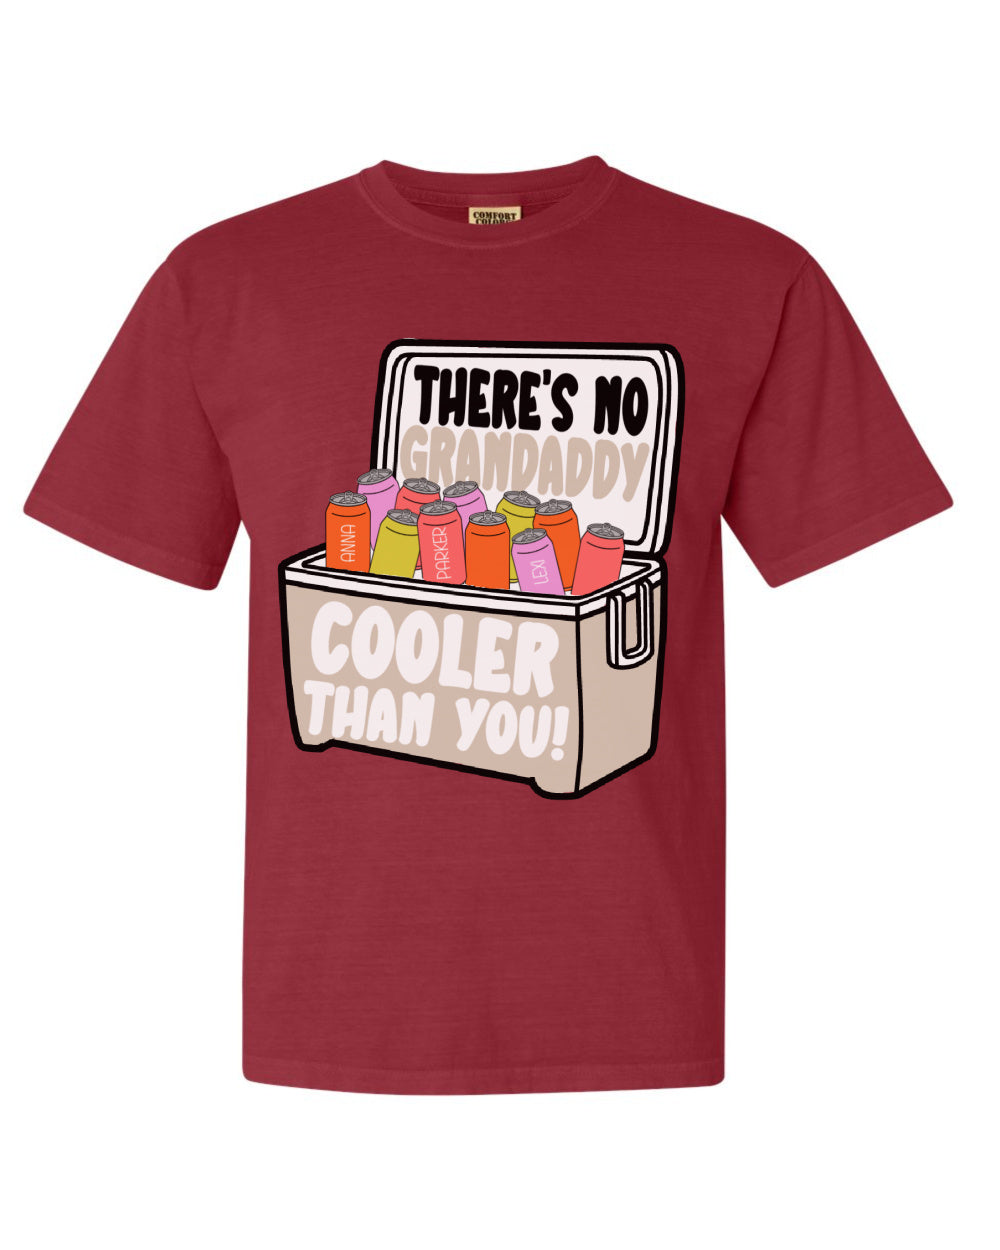 Fathers Day Tee/ There's No Grandaddy Cooler Than You Shirt / Custom Fathers Day with Names Shirt